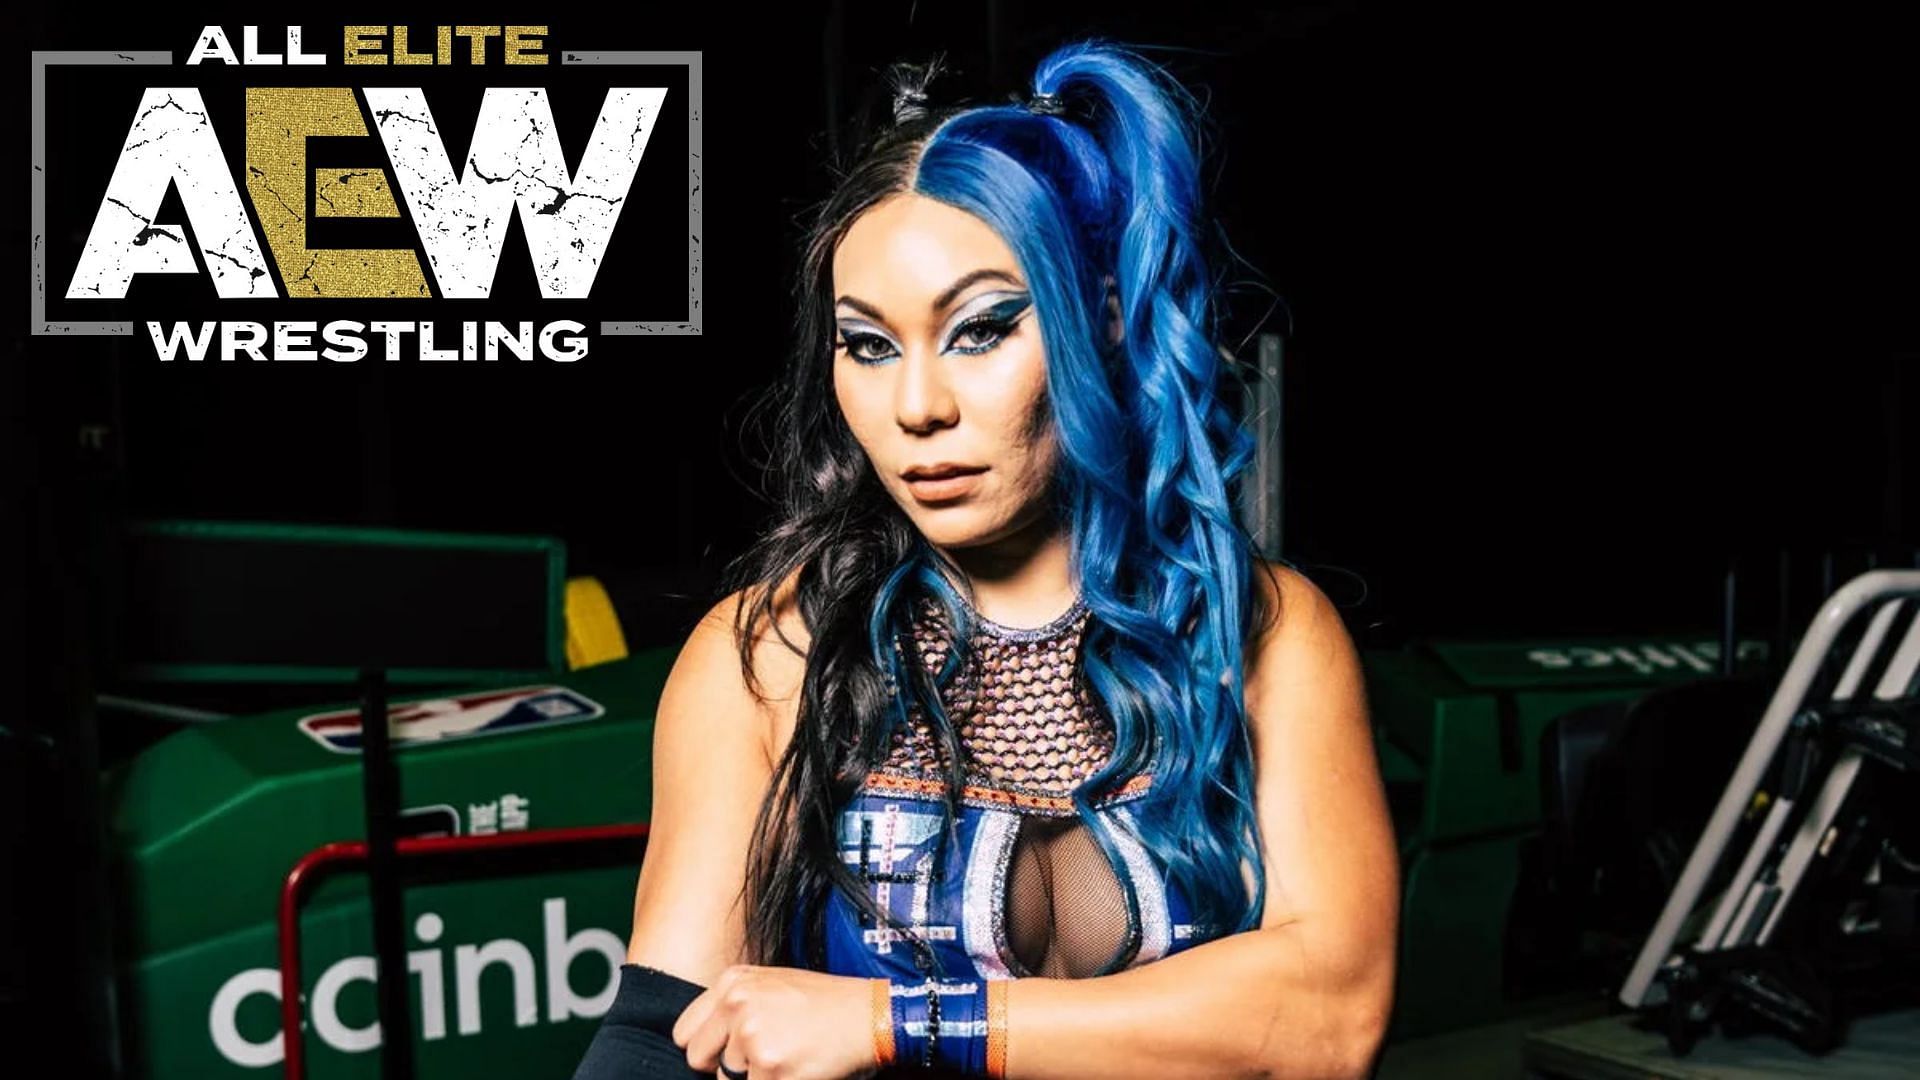 Who won in the war of words between Mia Yim and this major AEW star?